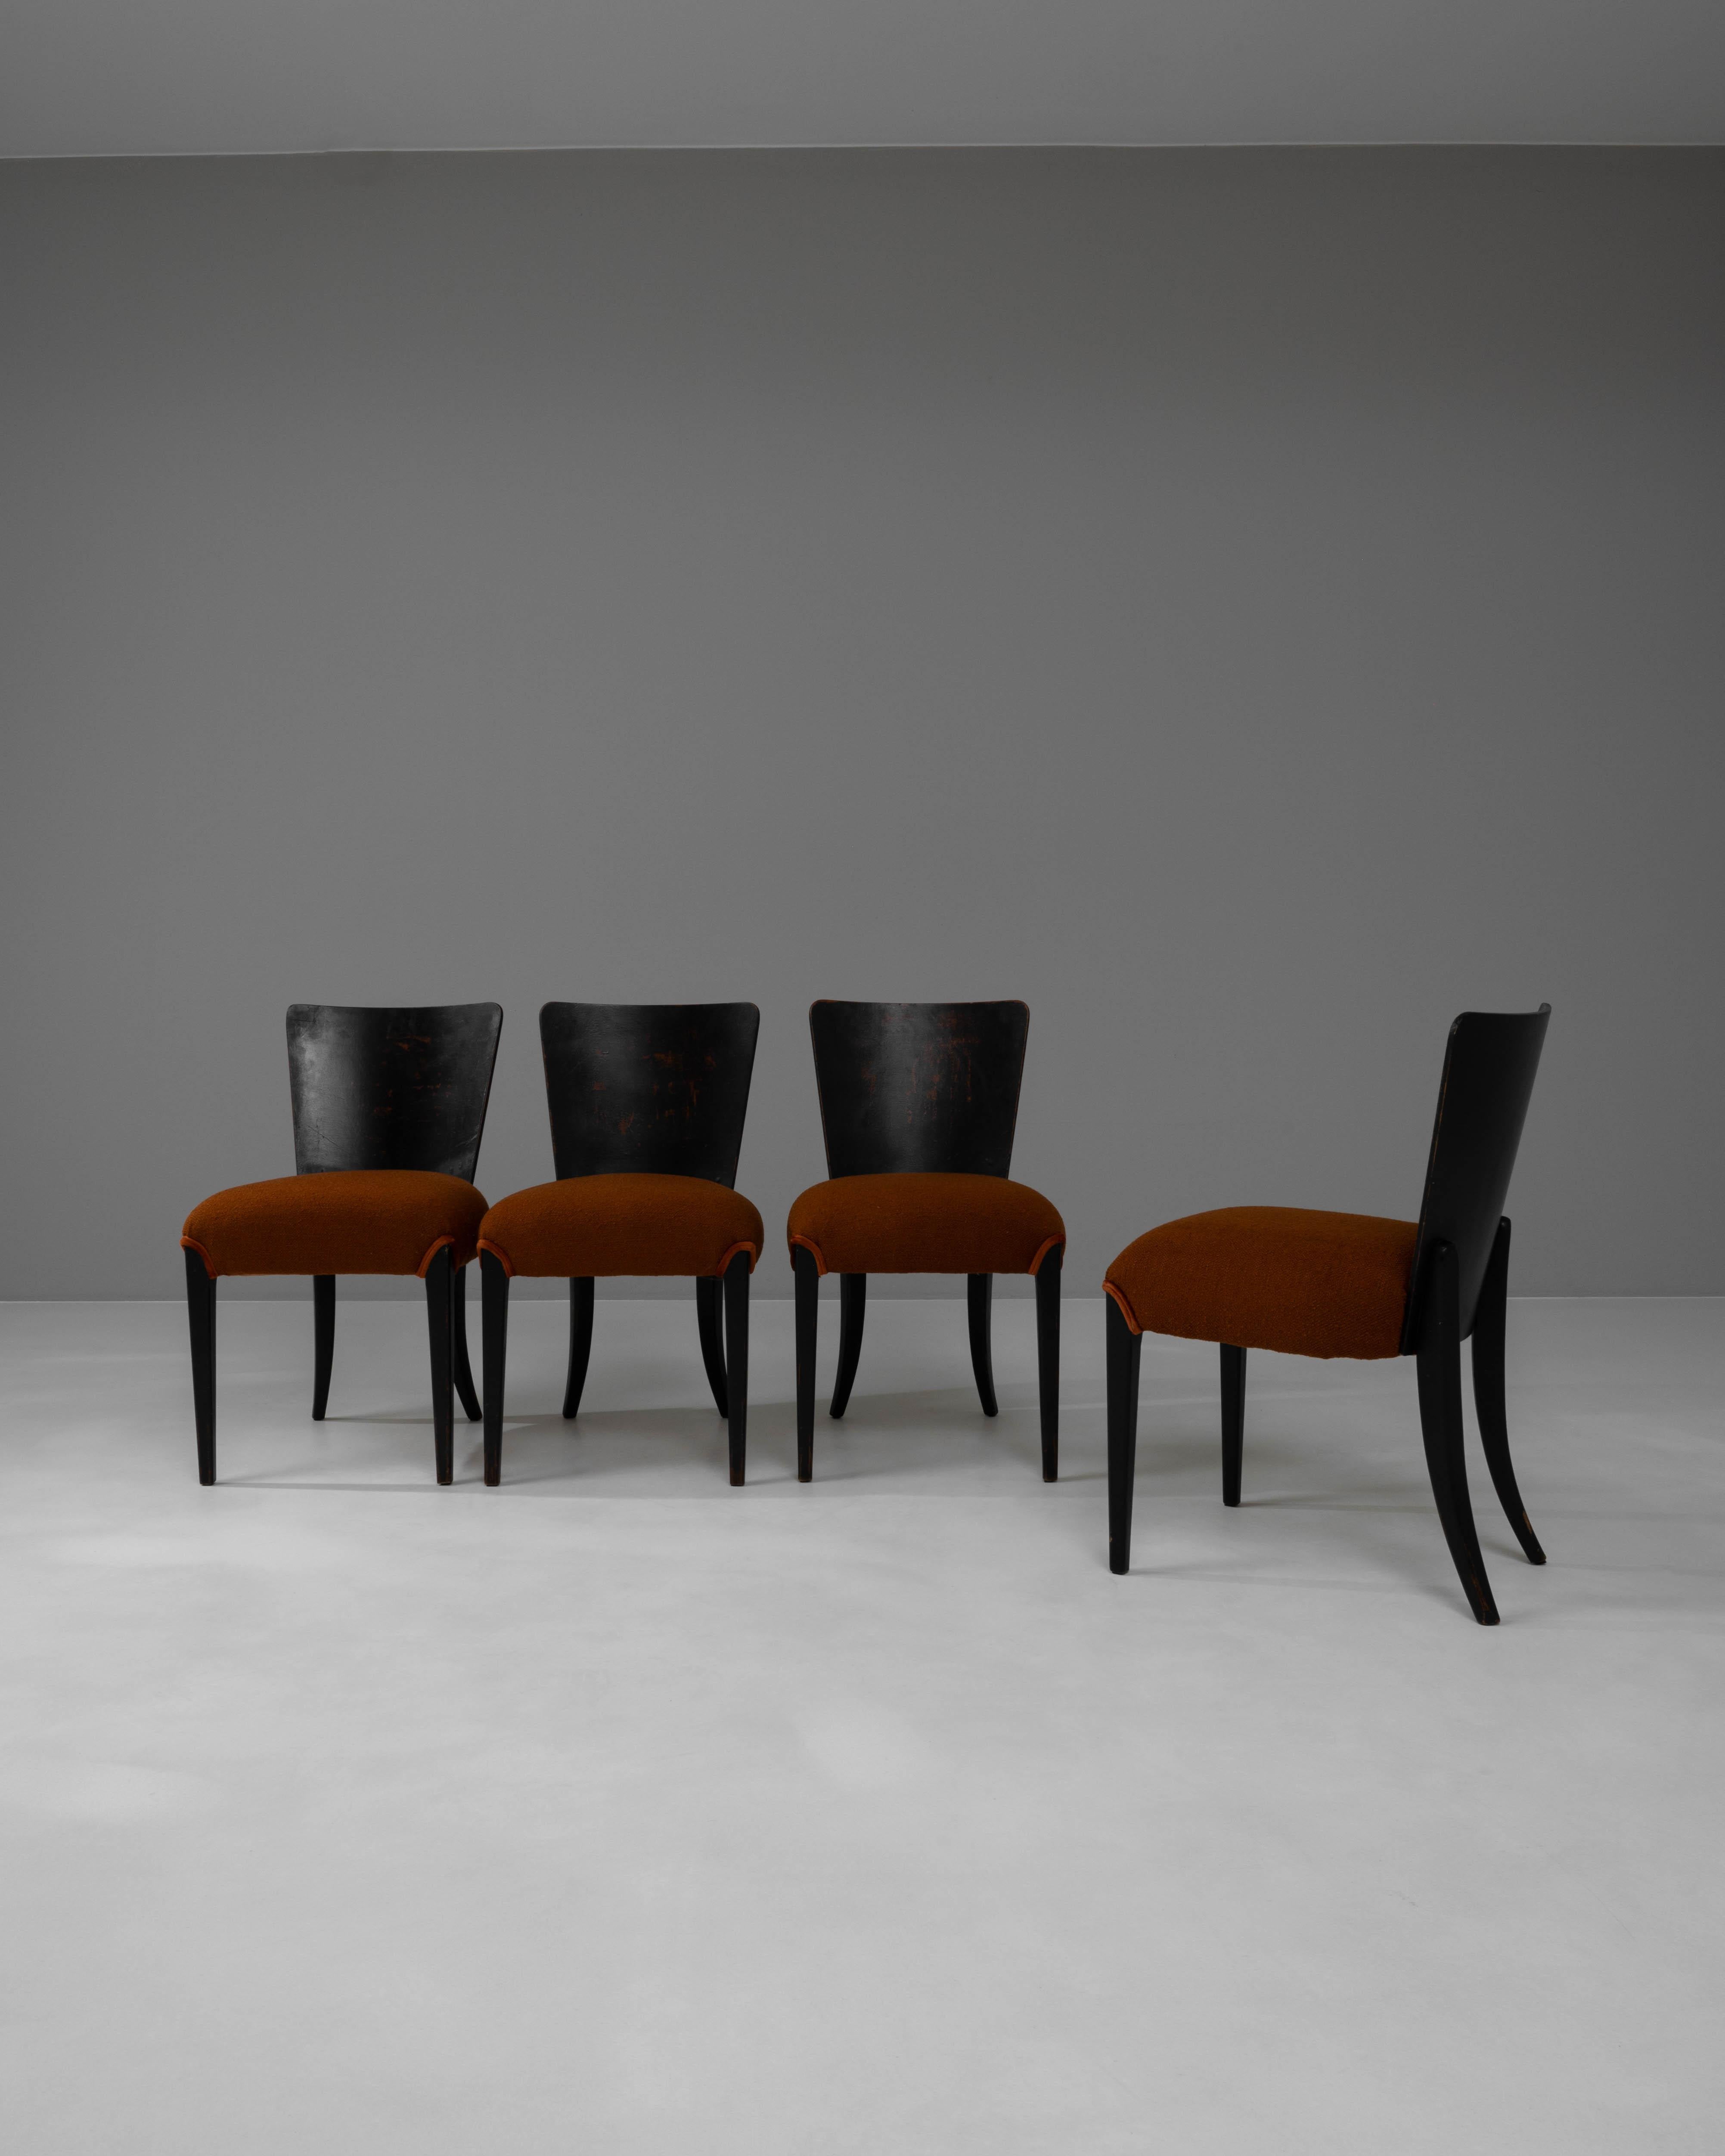 Elevate your dining room with this set of four striking 20th Century Czech Wooden Dining Chairs, masterfully designed by J. Halabala. Known for his innovative approach to design, Halabala's chairs feature sleek, curvaceous backrests that meld